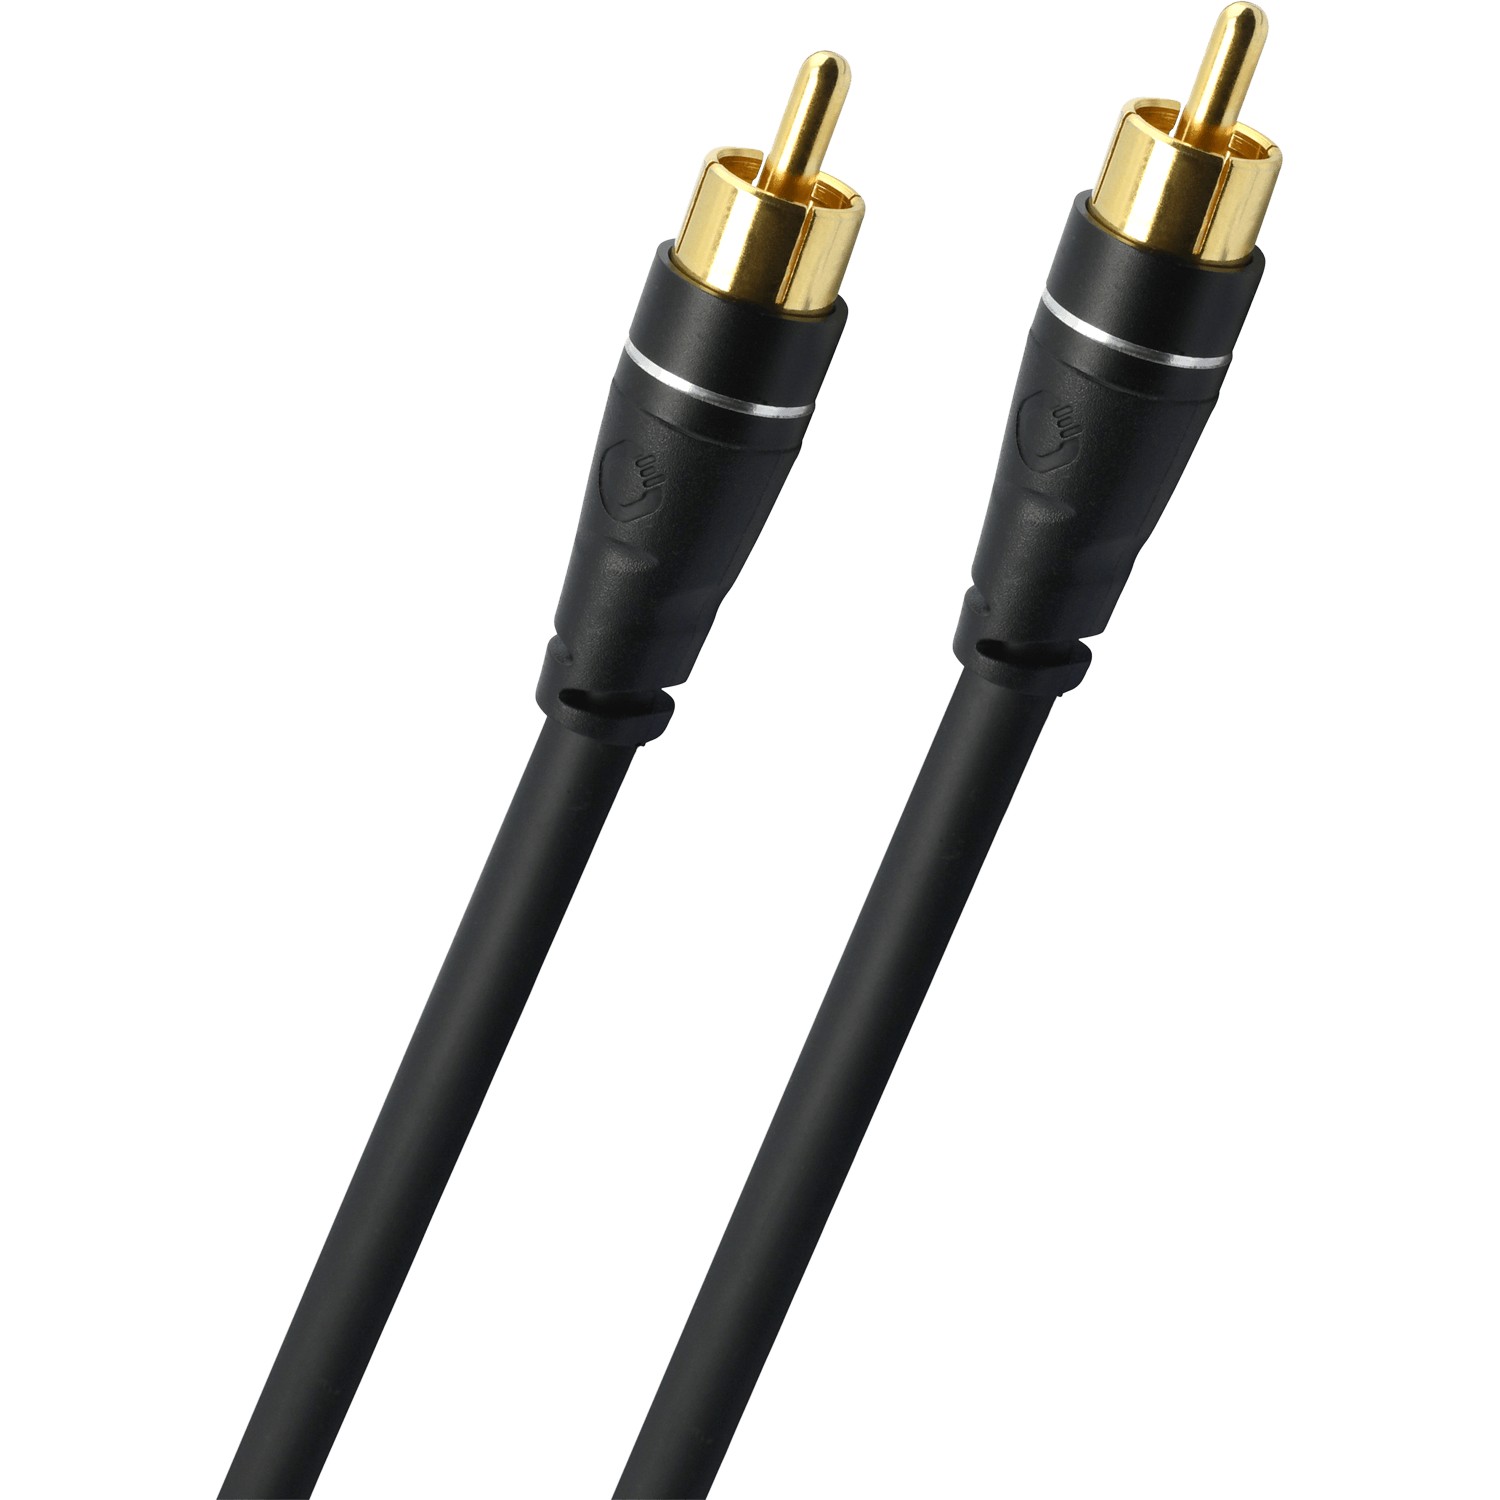 Кабели межблочные аудио Oehlbach EXCELLENCE Sub Link Subwoofer cable 5,0m bw, D1C33162 кабели межблочные аудио t a h link кабель 1 0 м